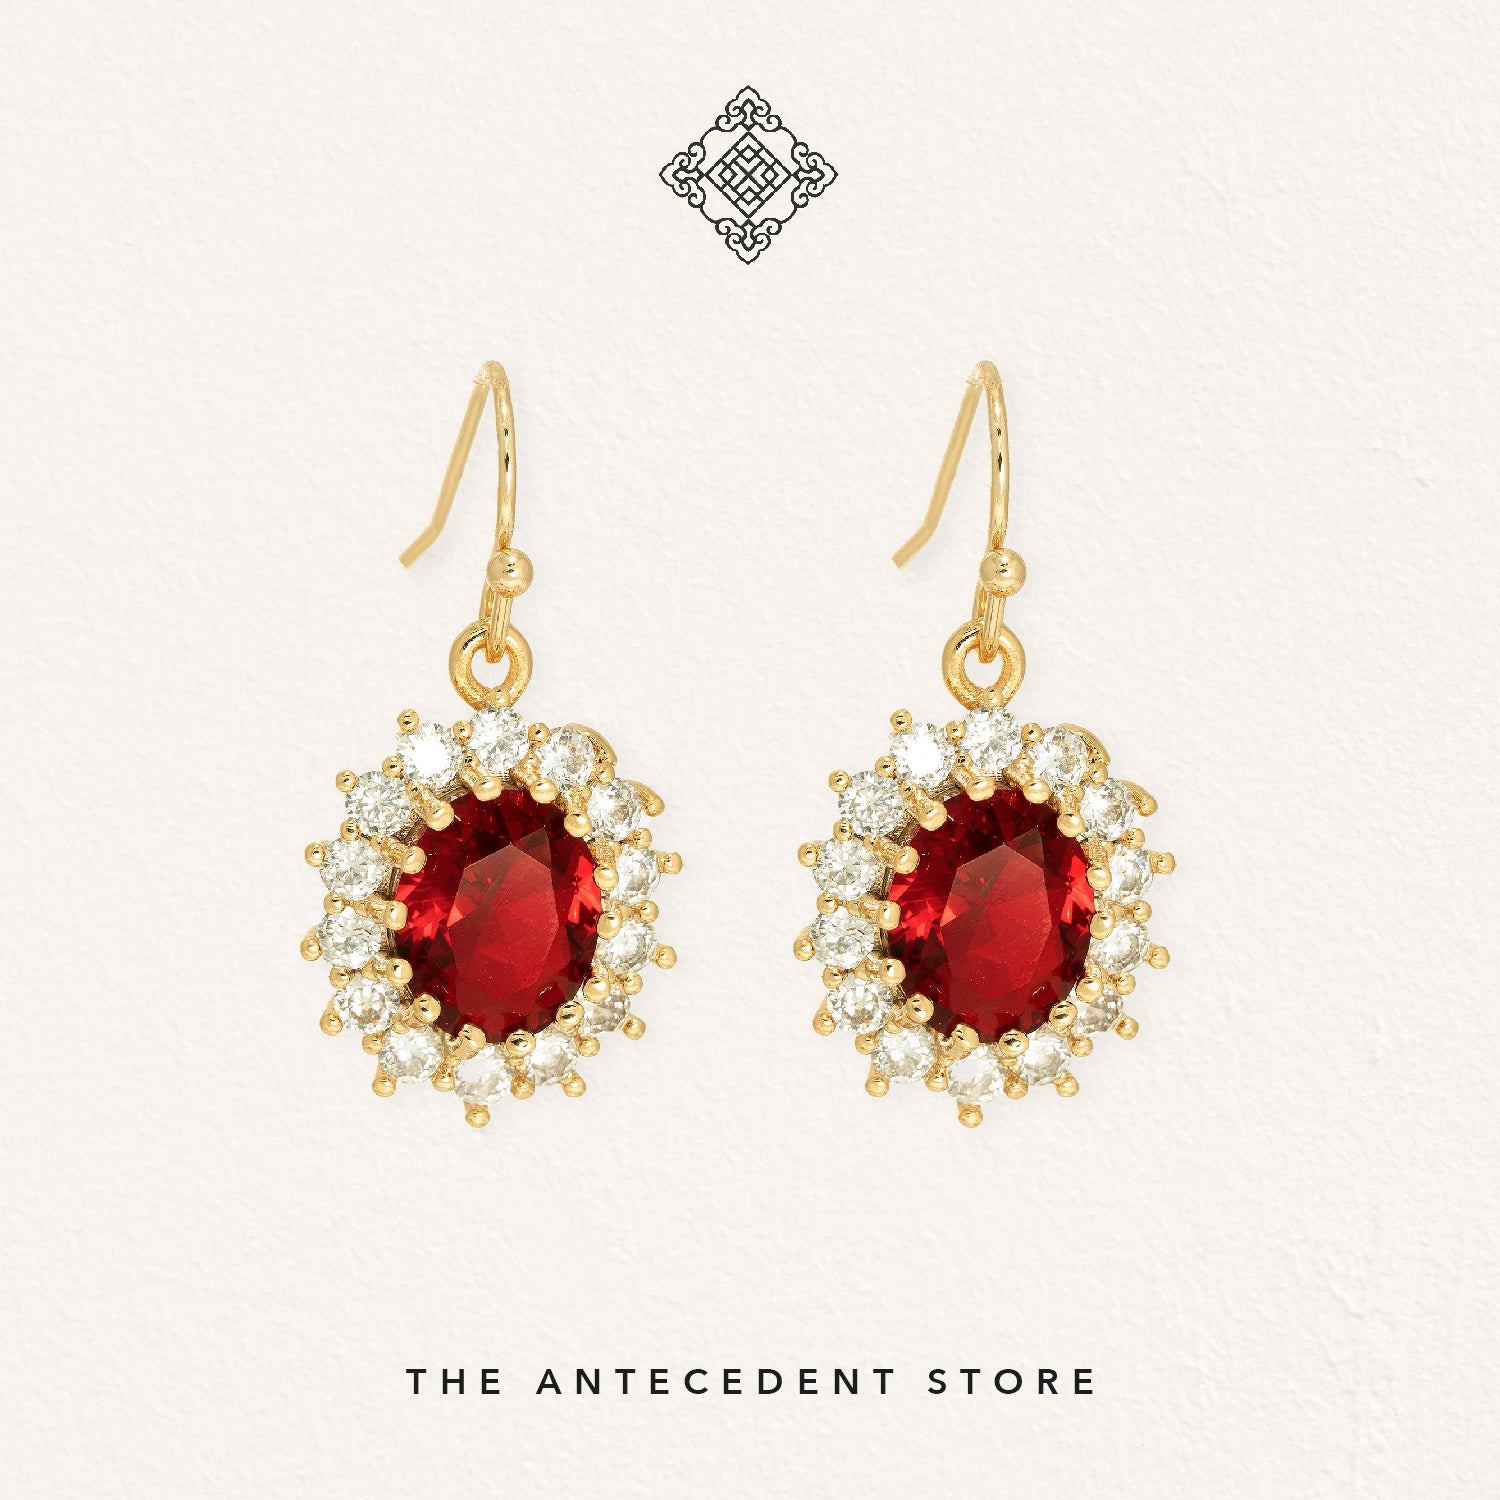 Red Ruby Earrings with Cubic Zirconia Crystals - 14K Real Gold Plated Jewelry